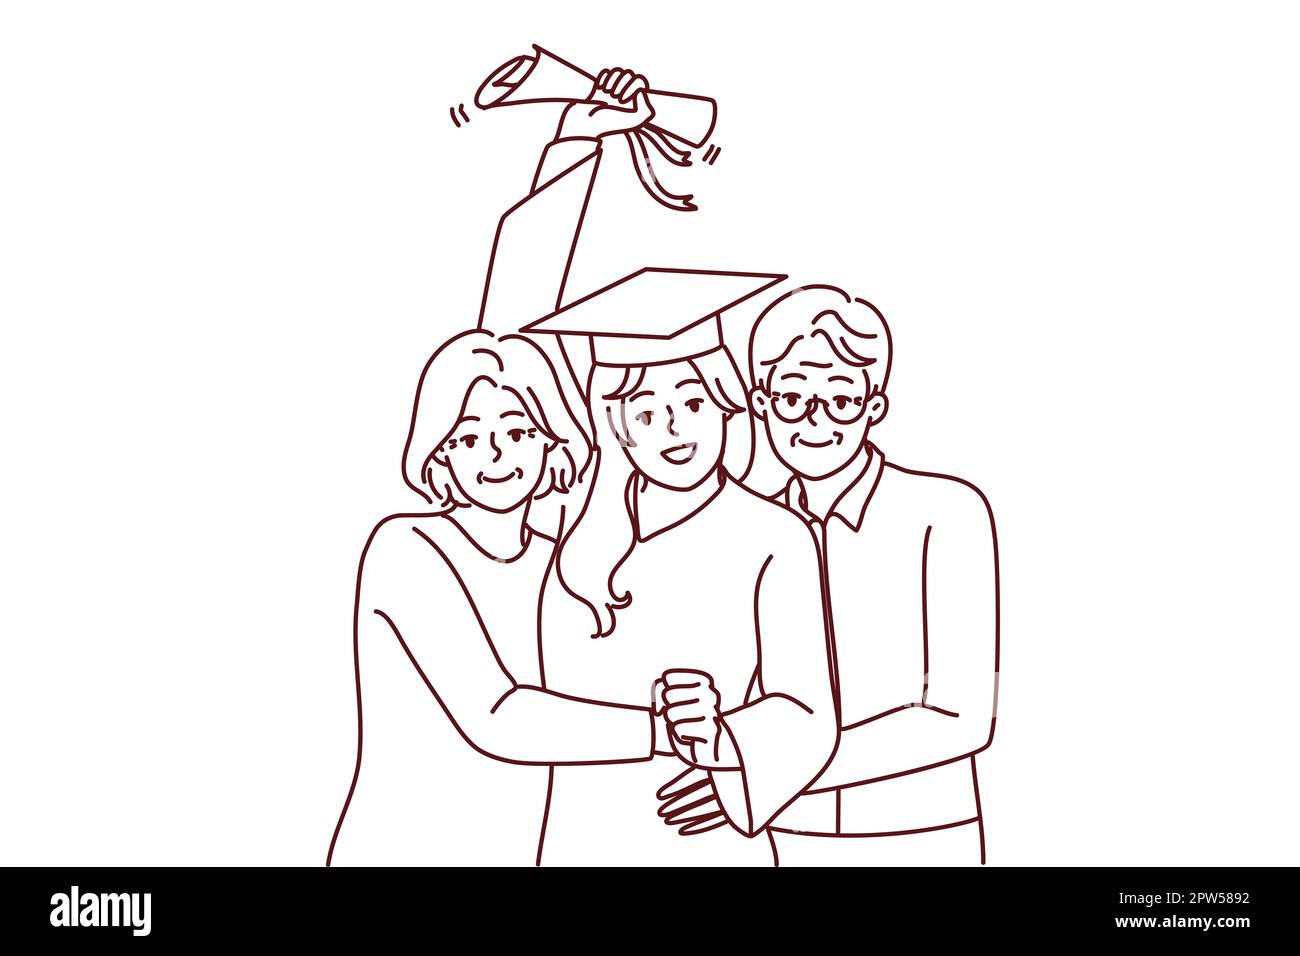 Happy elderly parents hug excited daughter in graduation mantle holding diploma. Smiling mature mom and dad embrace happy girl graduate from universit Stock Photo